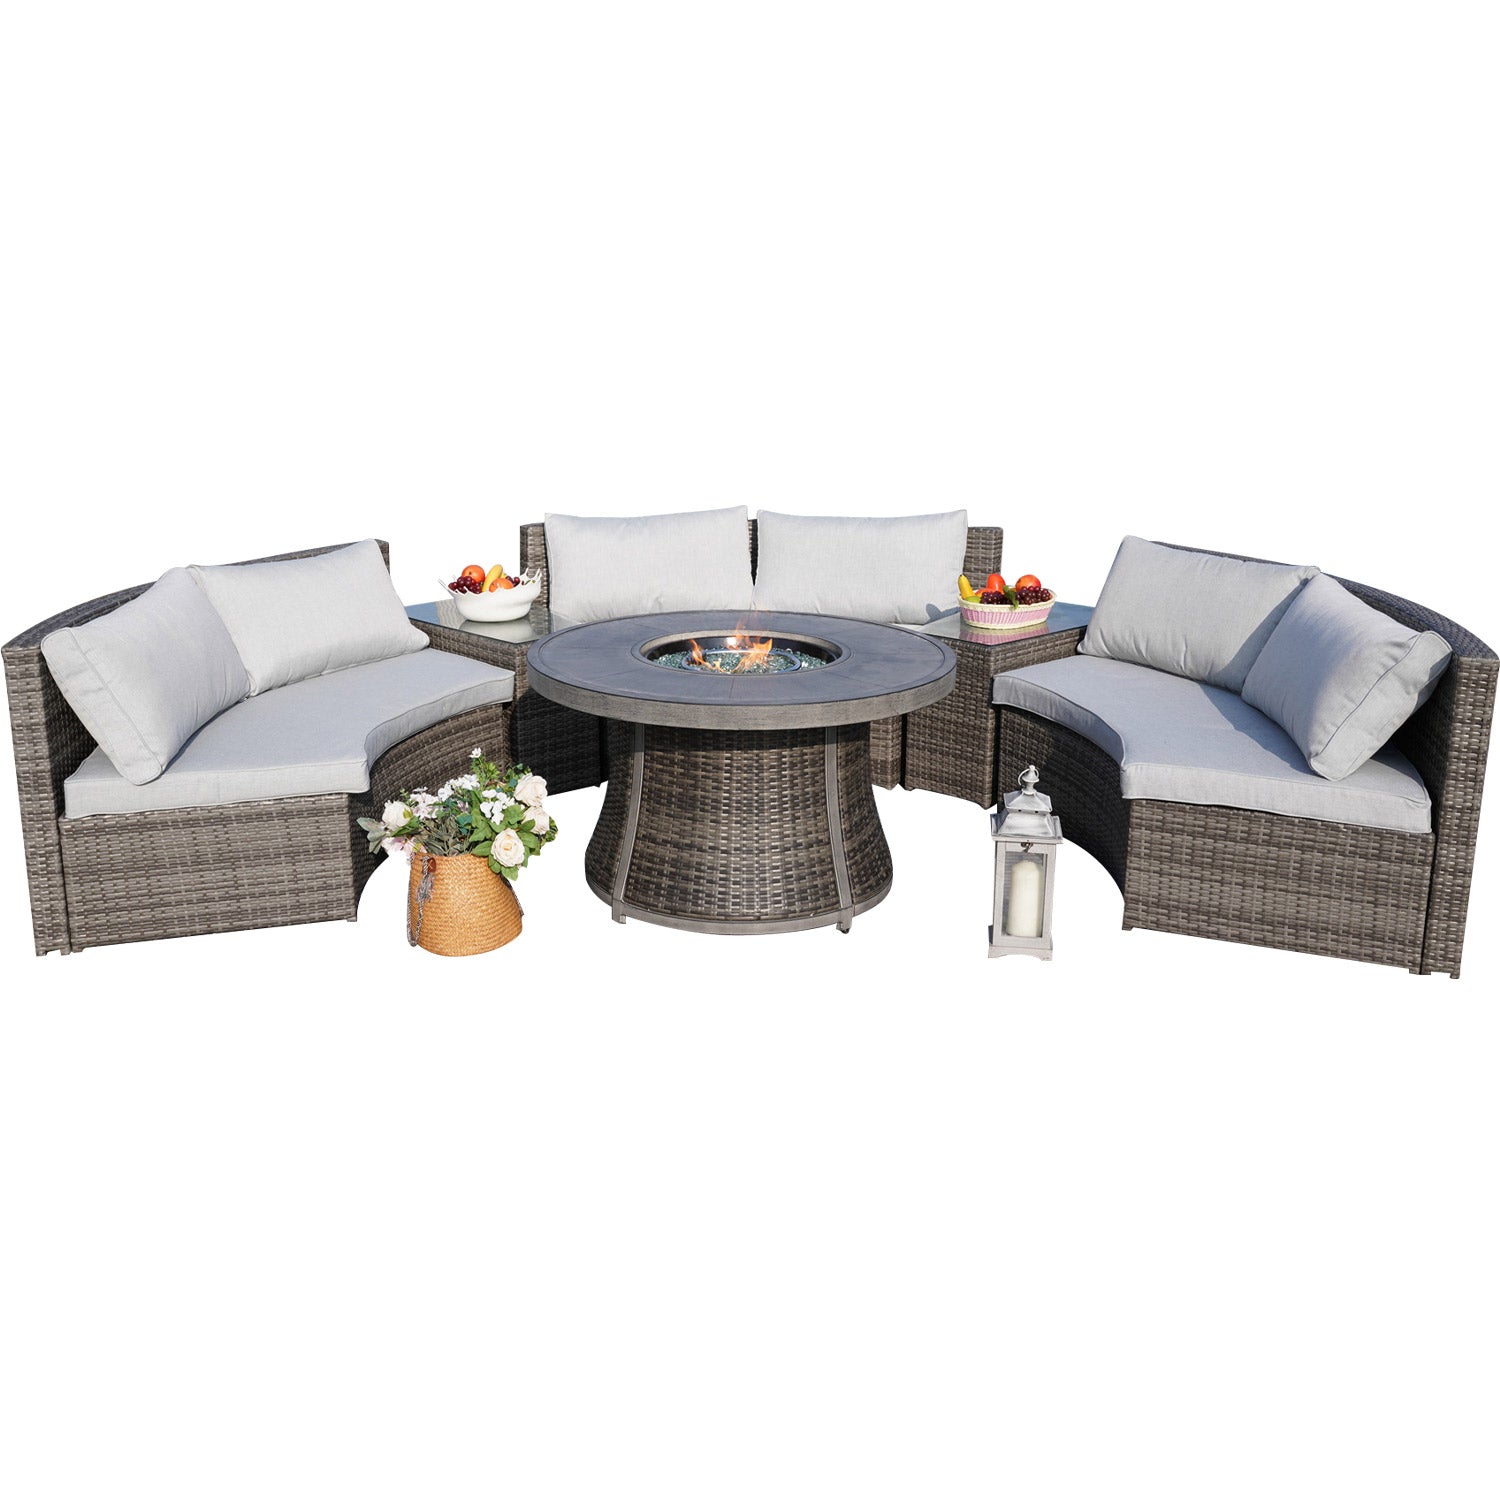 Abrihome Jessica 6 Piece Rattan Sectional Fire Table Set with Cushions